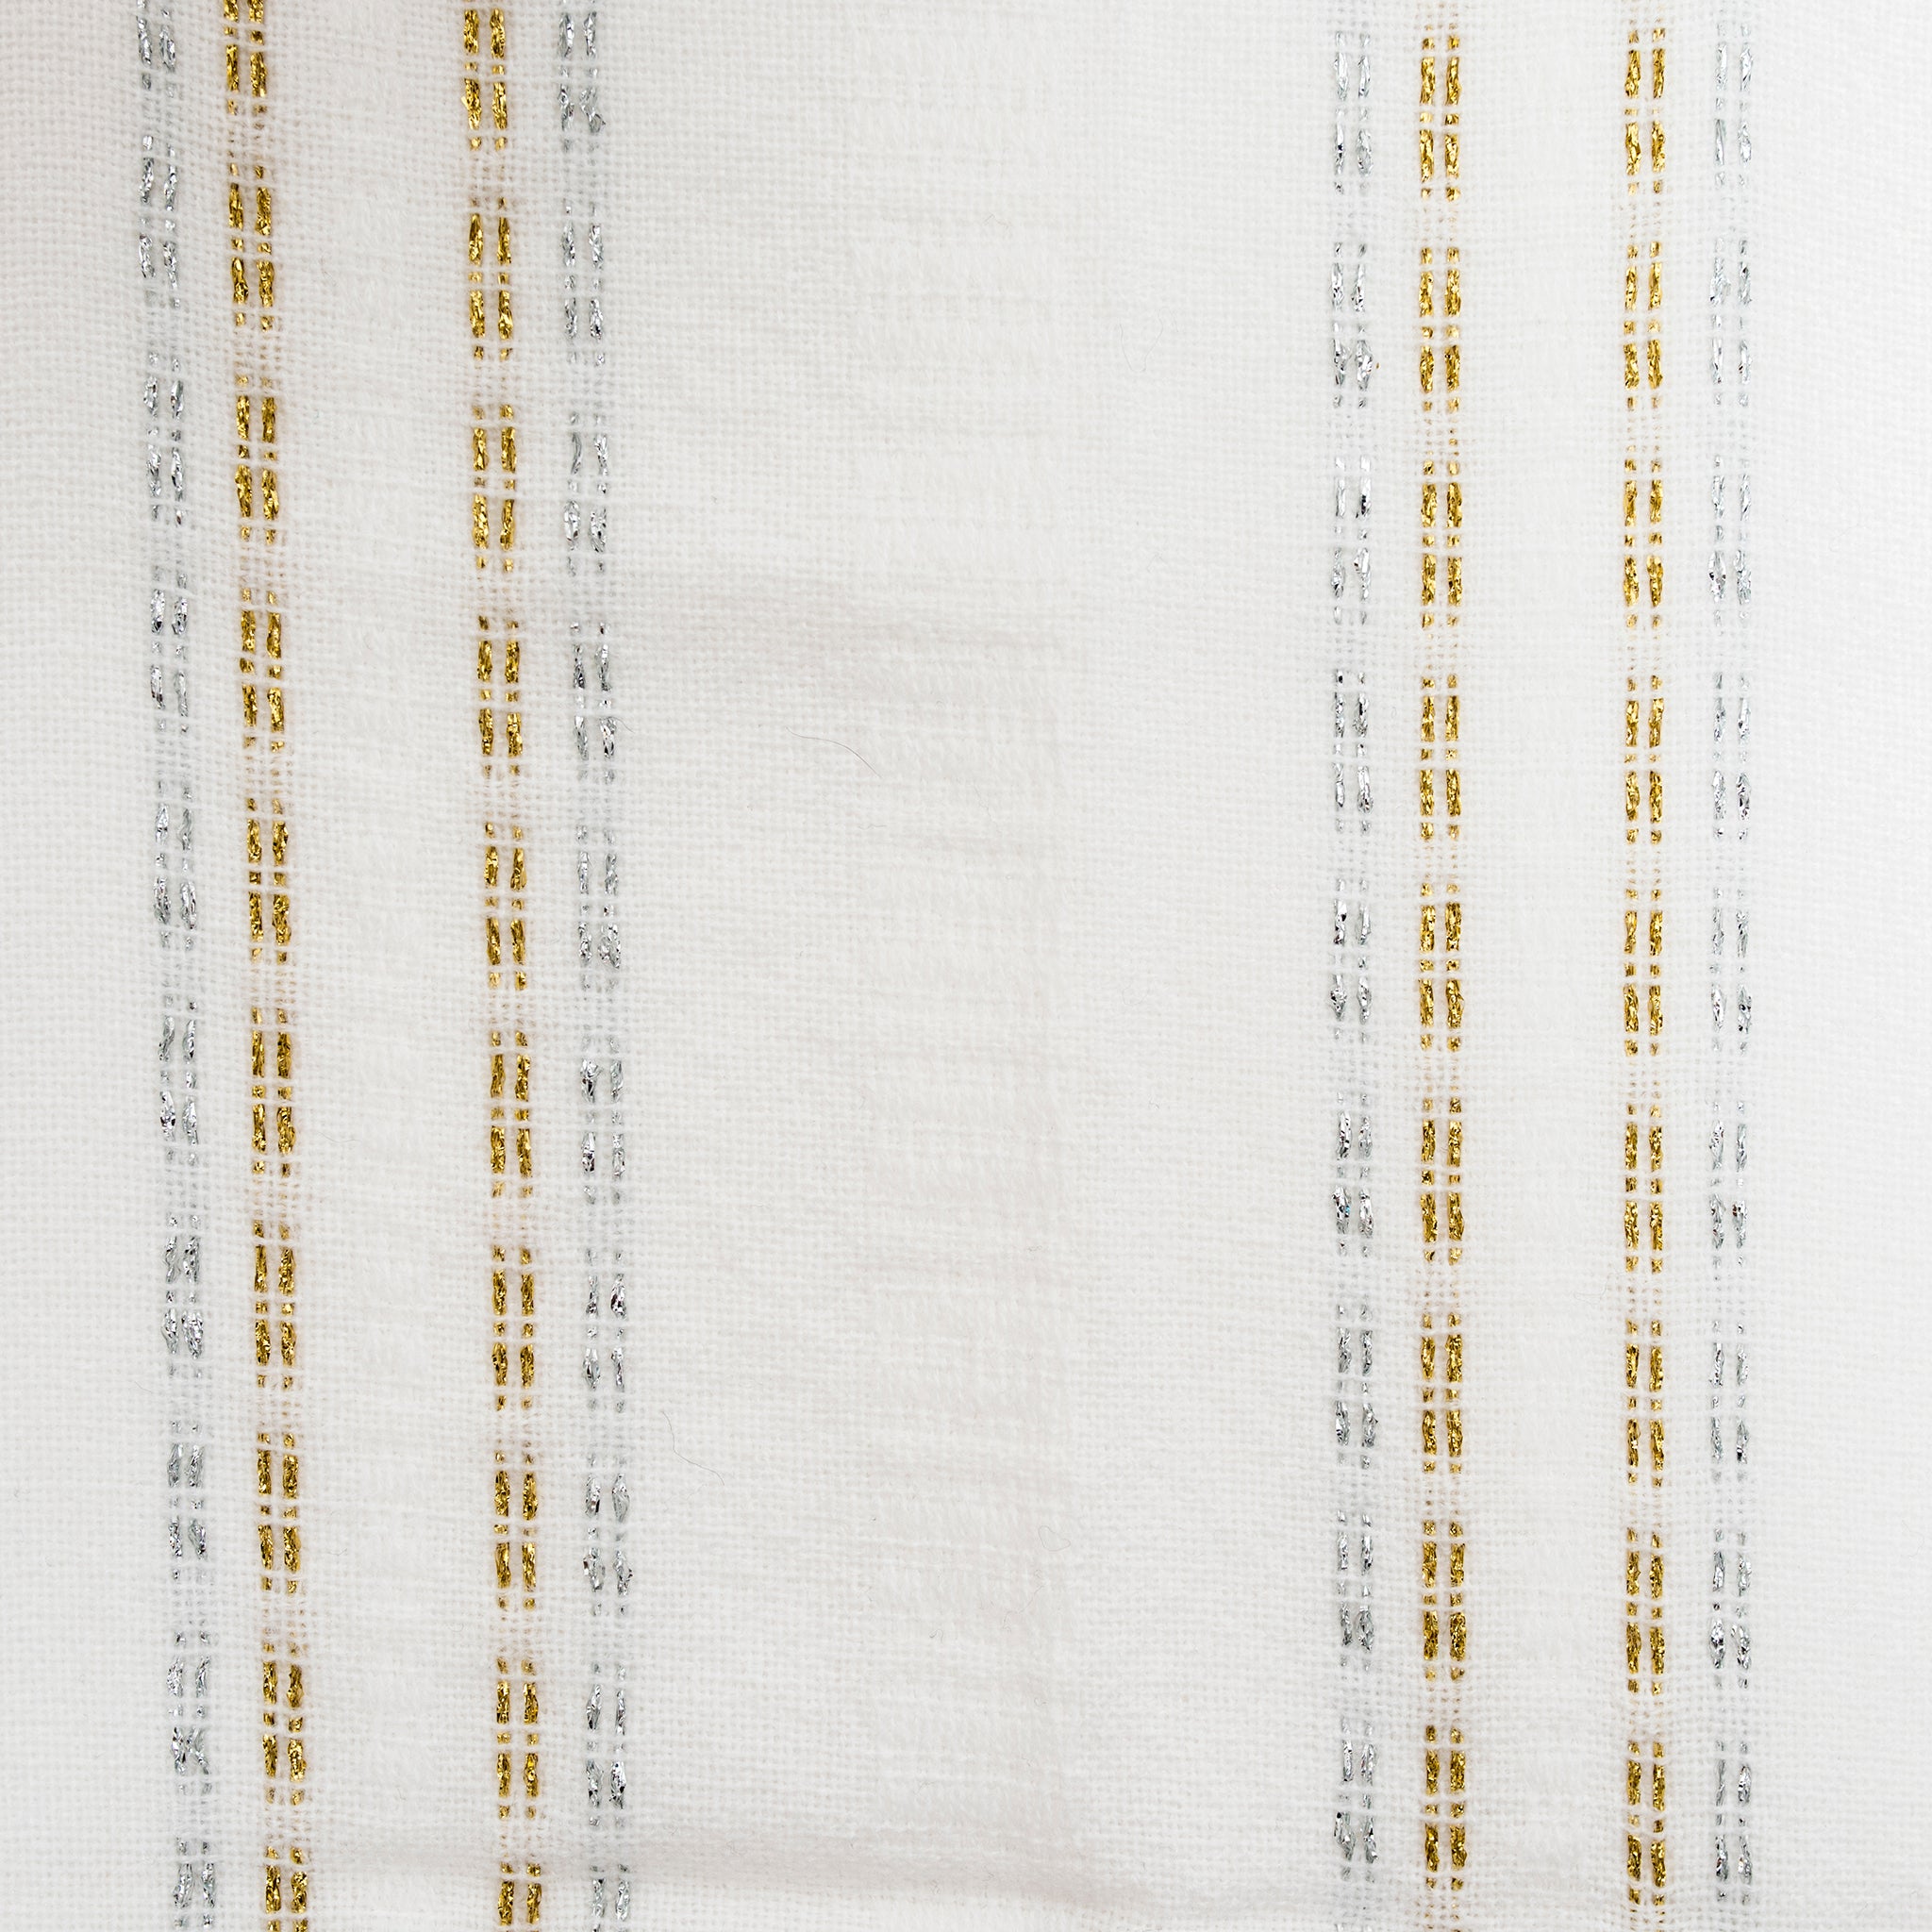 Tablecloths - Bold Design - Silver and Gold on White